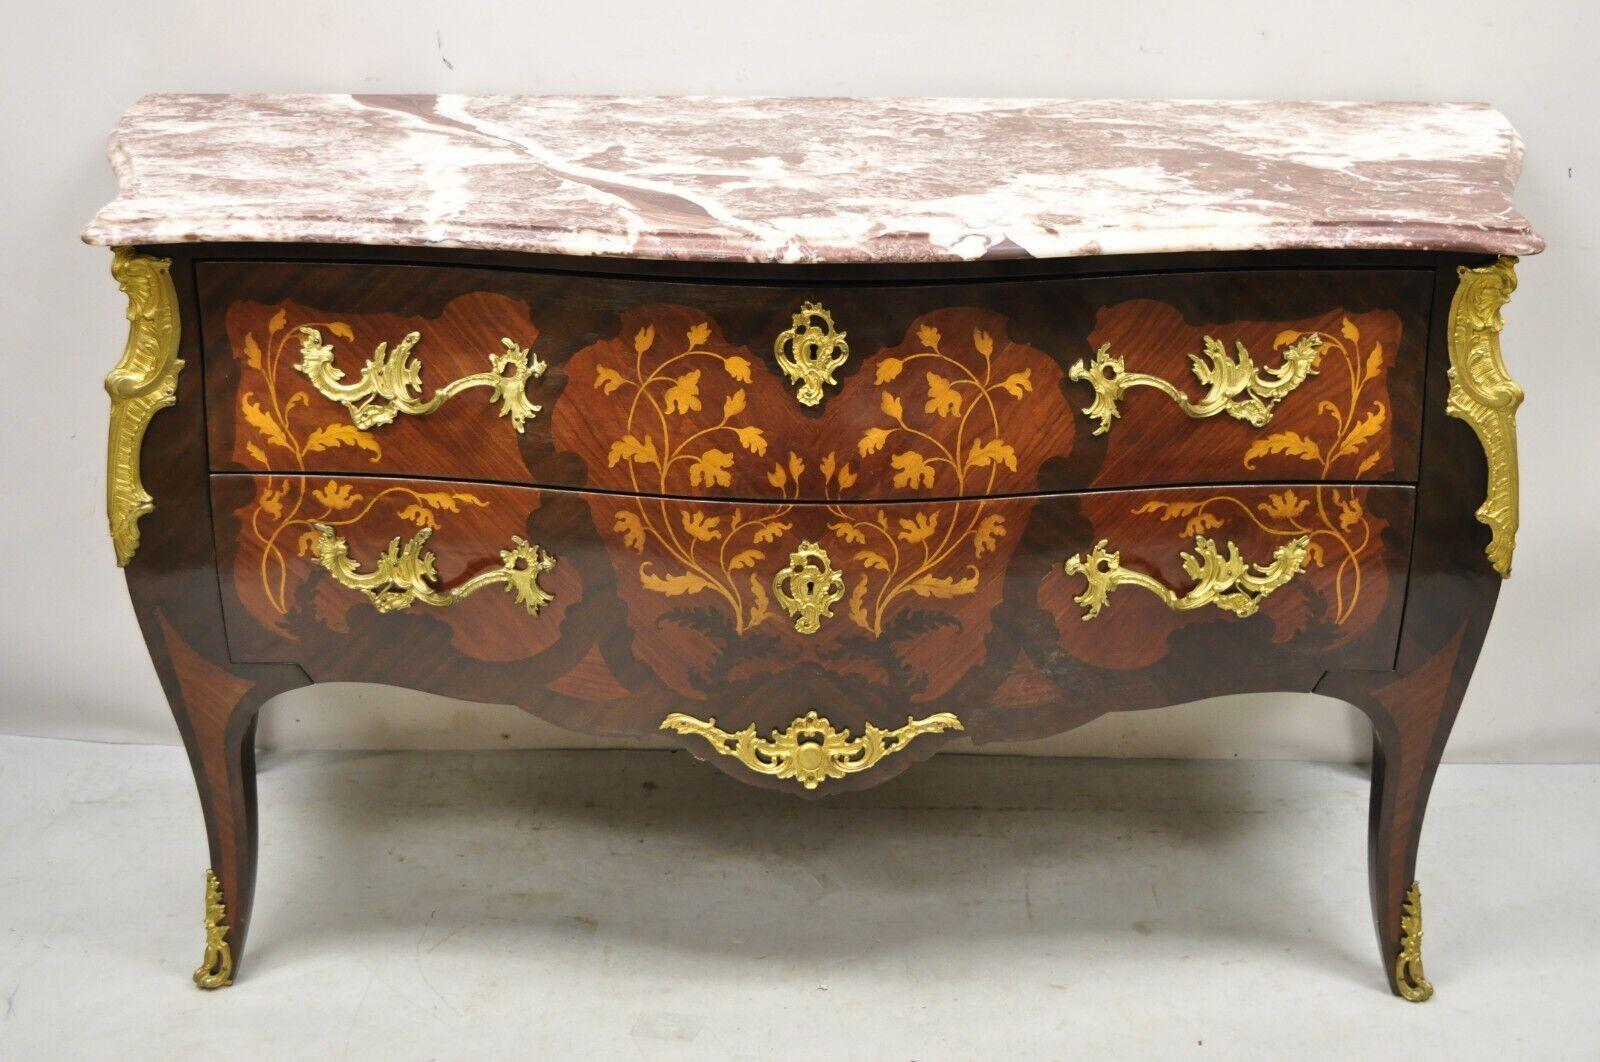 French Louis XV style marble top bombe commode dresser bronze ormolu. Item features ornate bronze ormolu, floral satinwood inlay, shapely bombe form, rouge marble top, beautiful wood grain, 2 drawers. Circa late 20th century. Measurements: 34